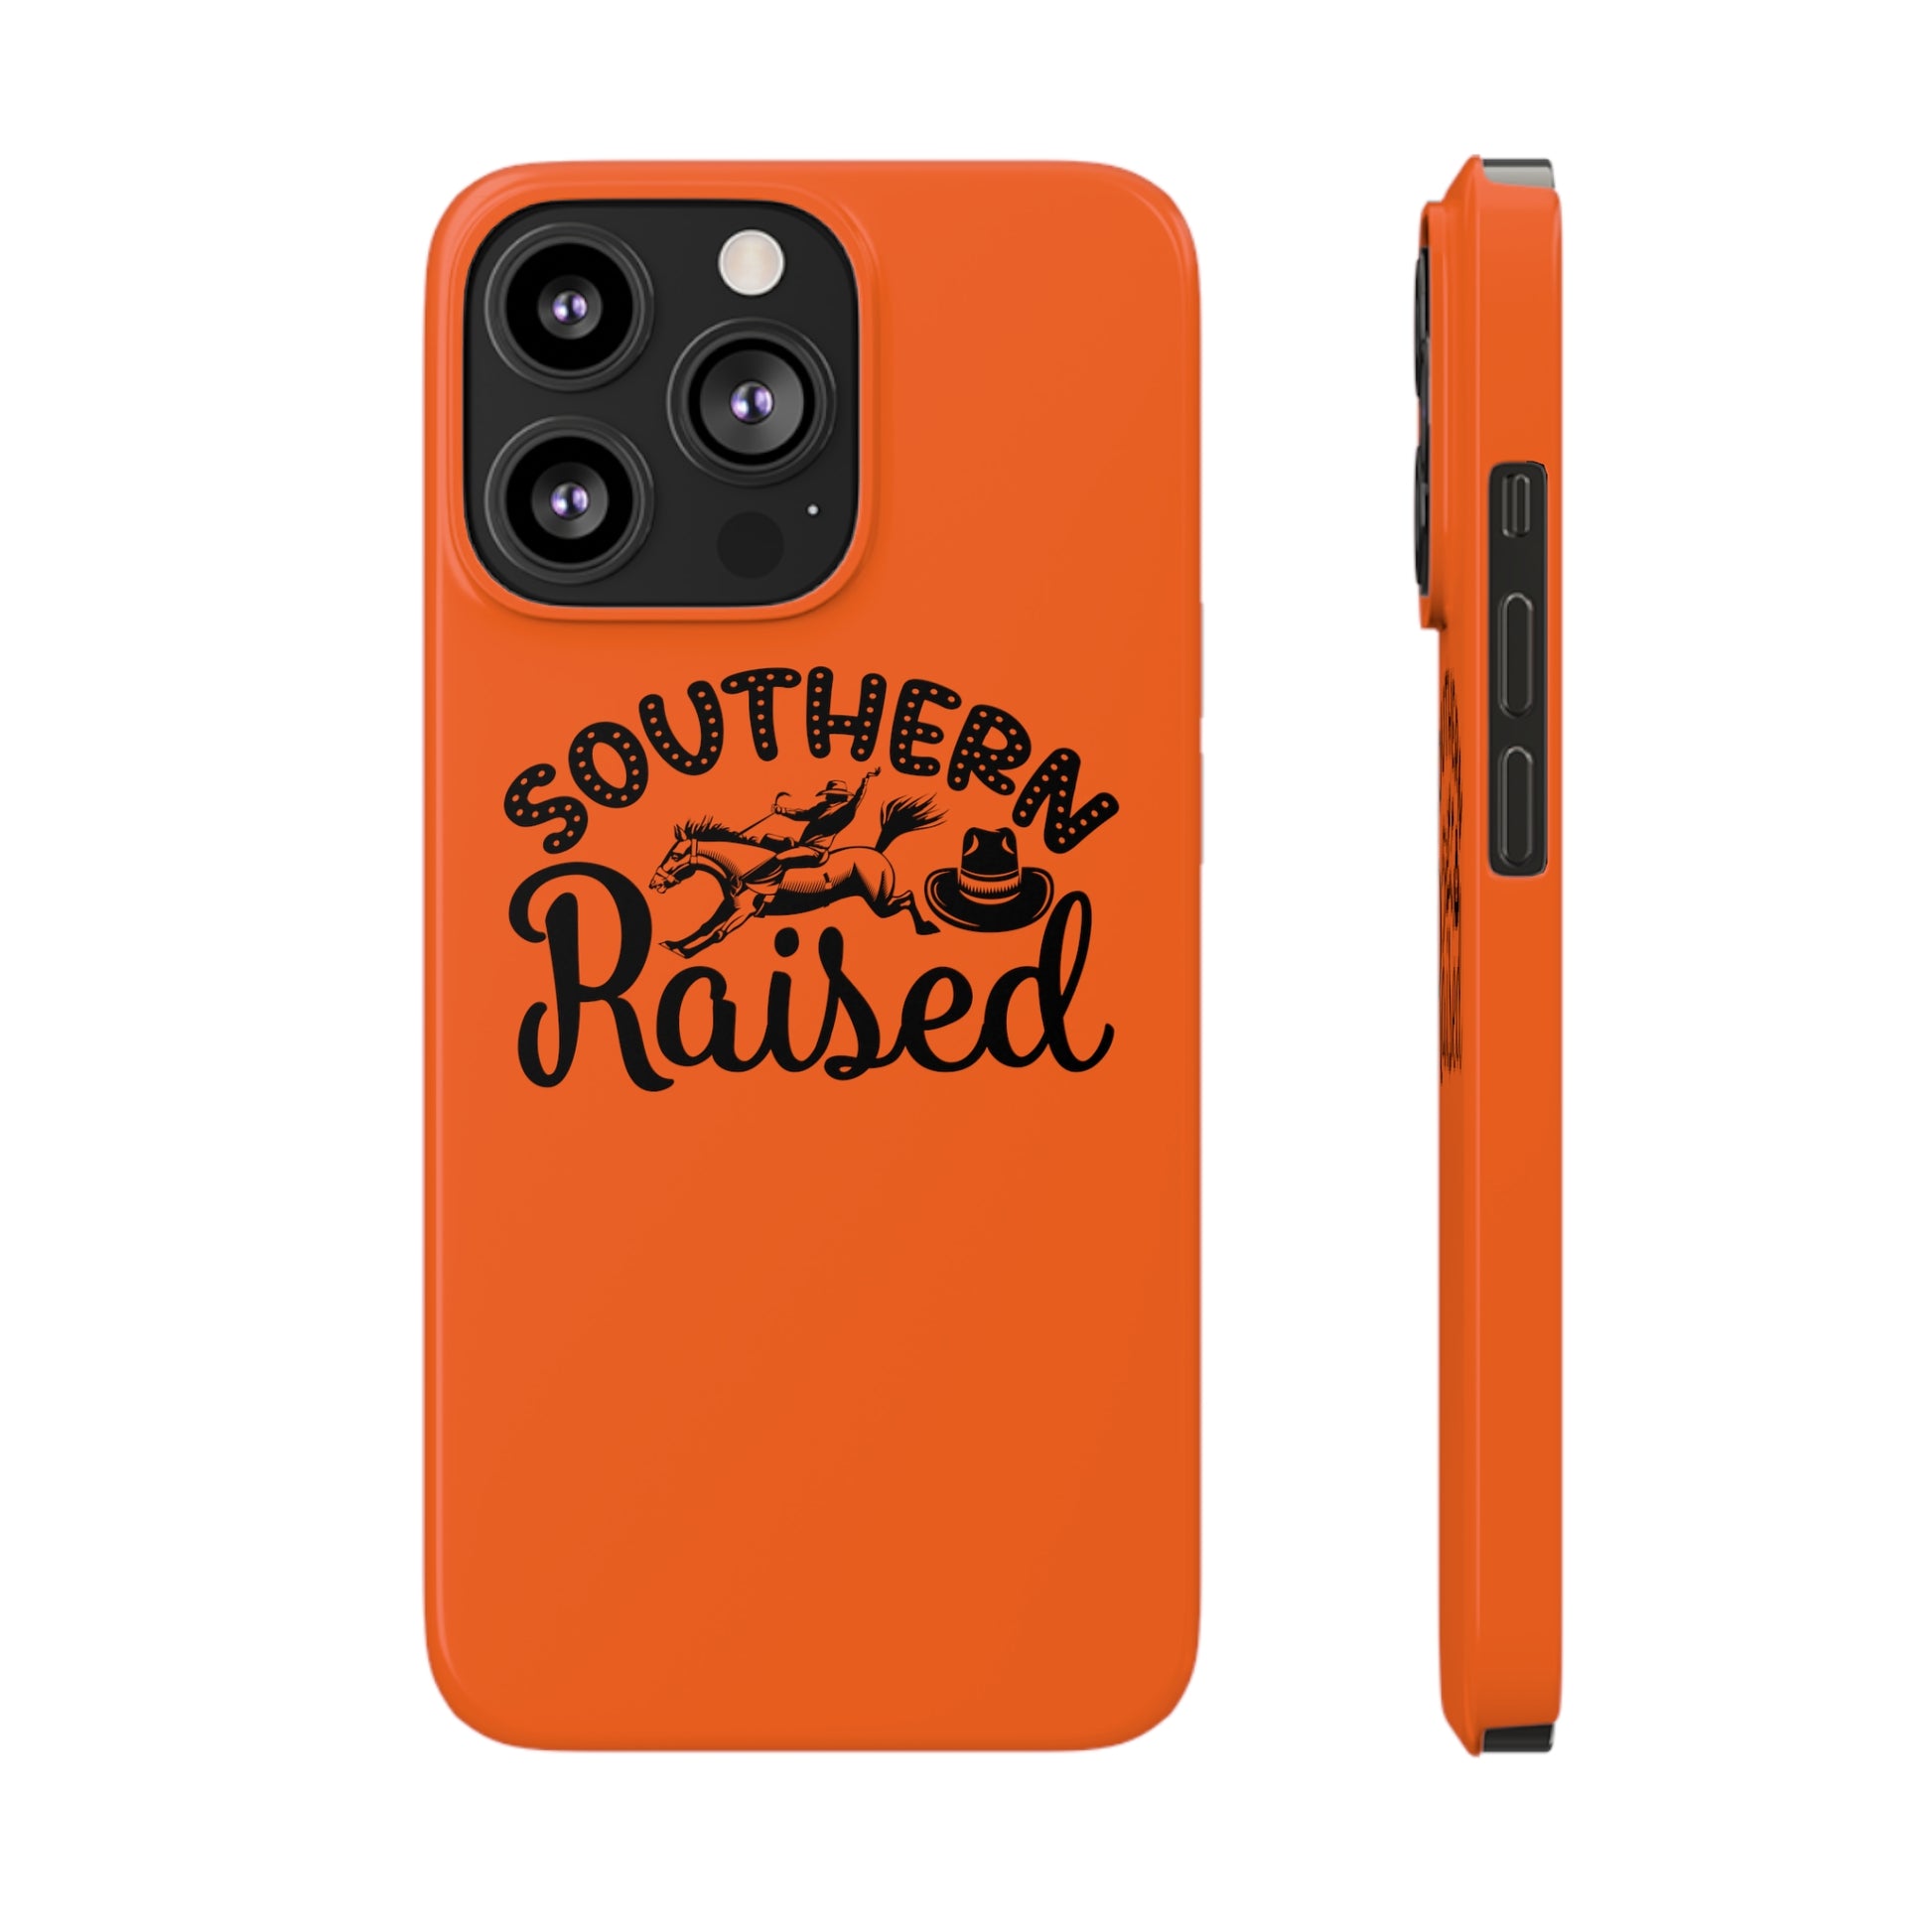 "Southern Raised" iPhone Case - Weave Got Gifts - Unique Gifts You Won’t Find Anywhere Else!